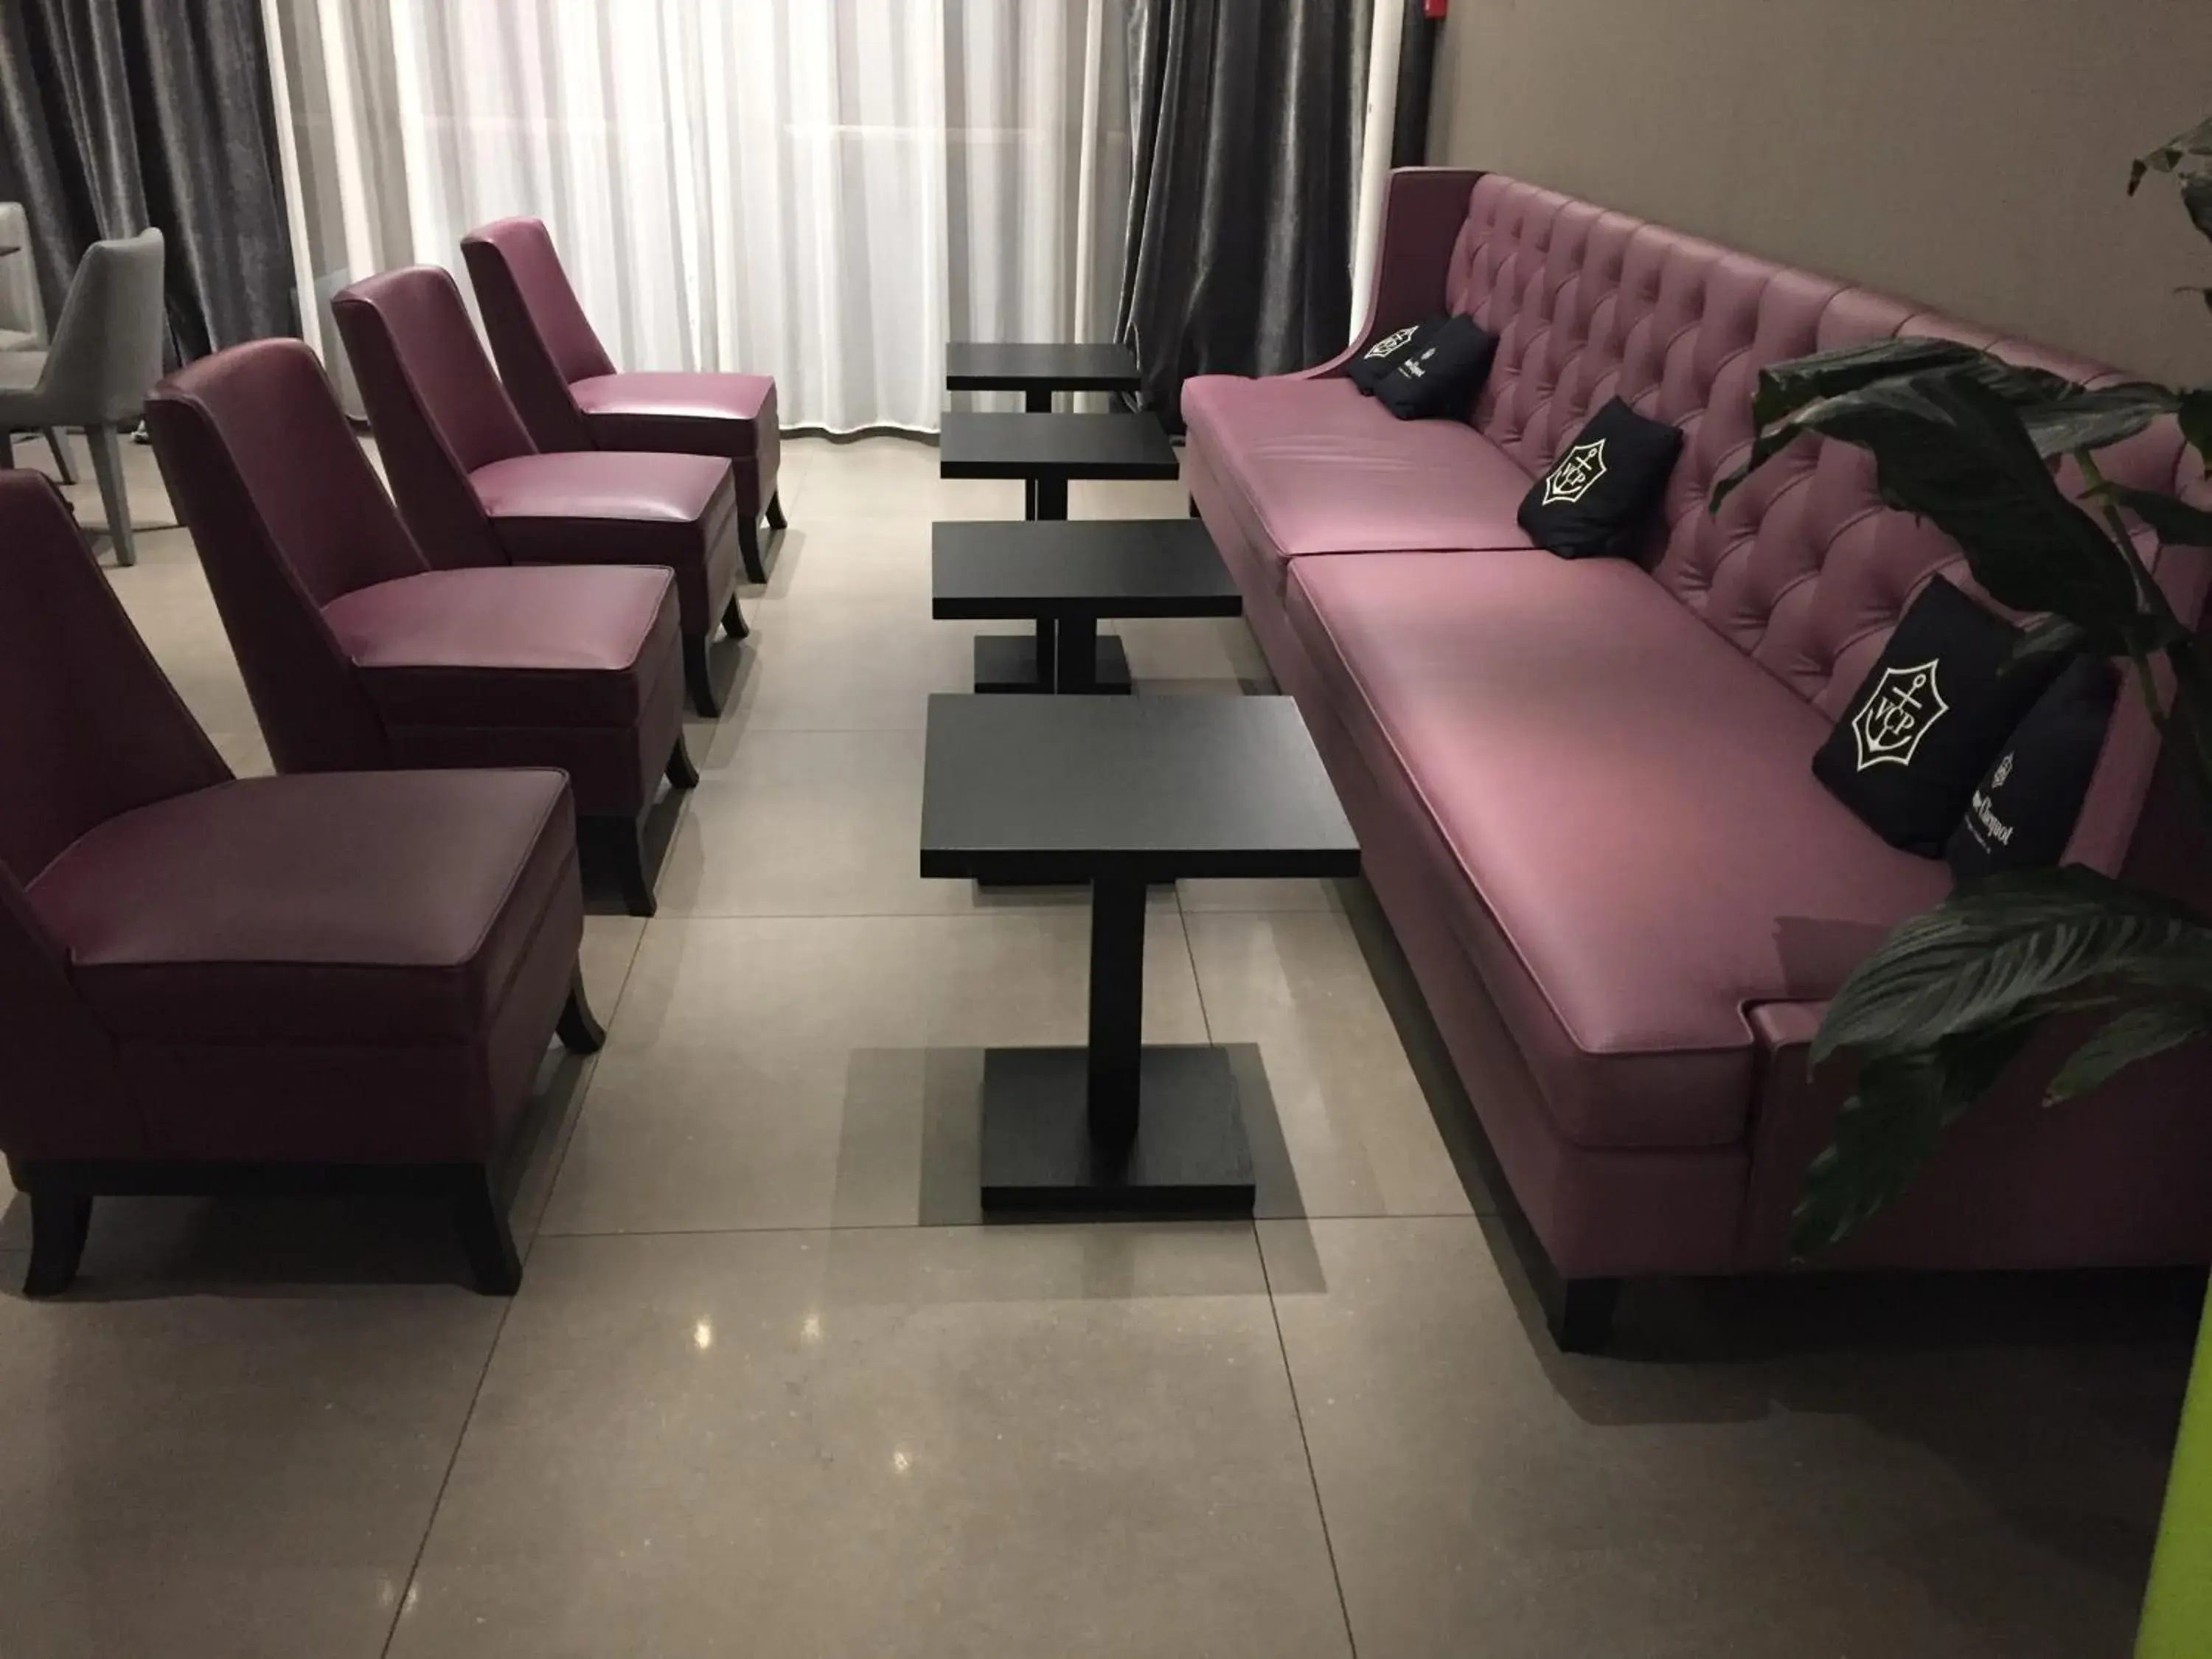 Seating Area in Link124 Hotel